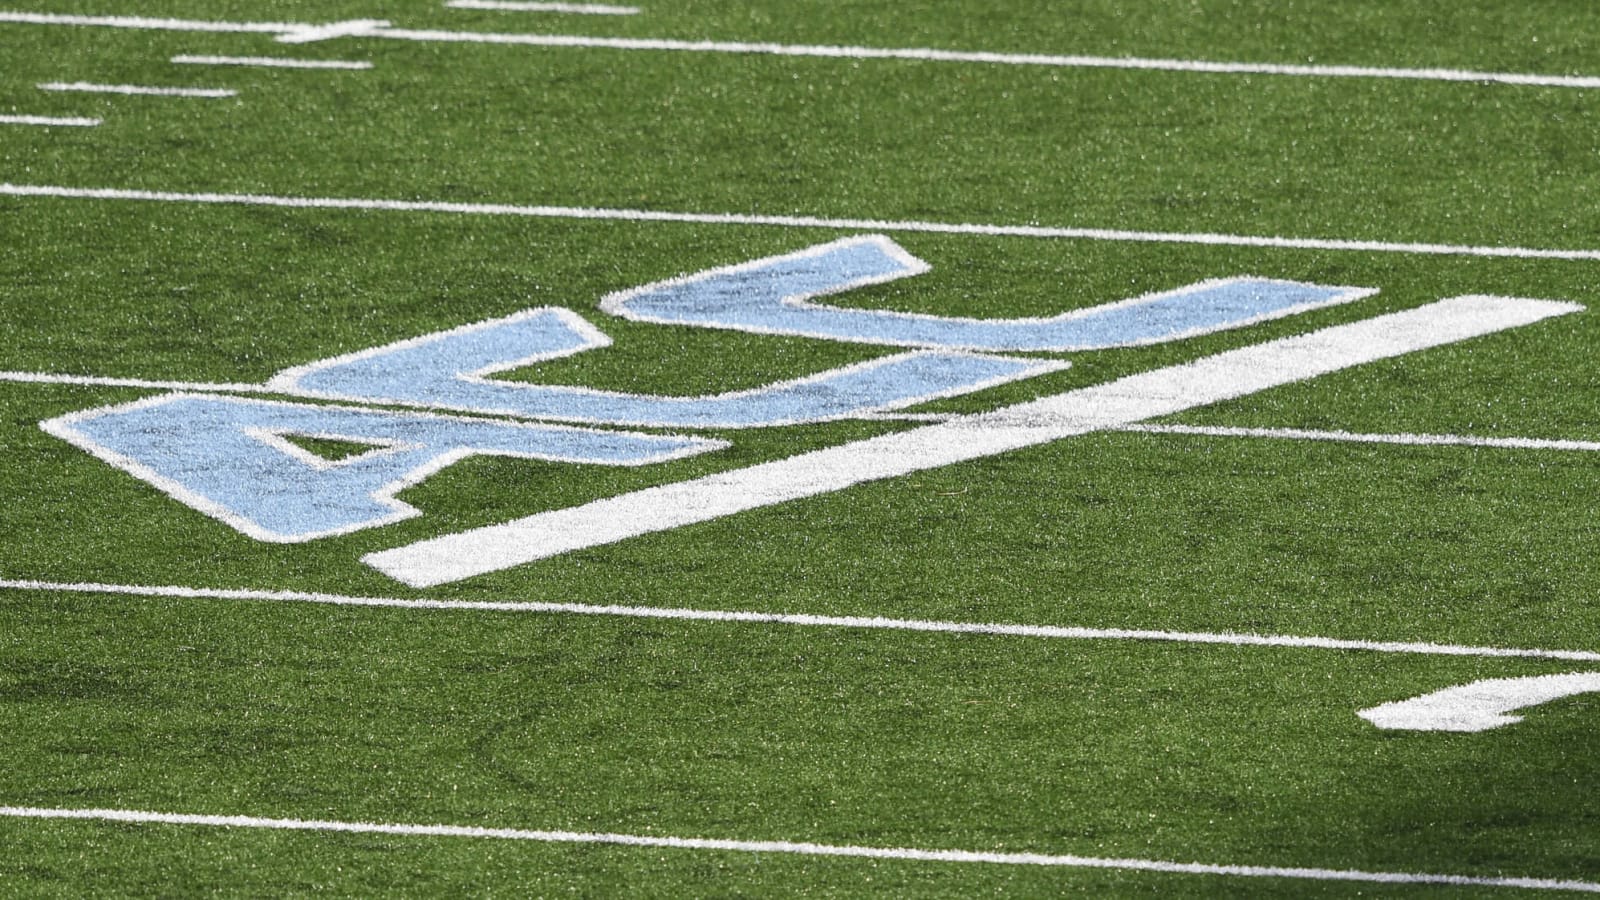 ACC, Big Ten, Pac-12 announce alliance: Why it happened, what the future holds